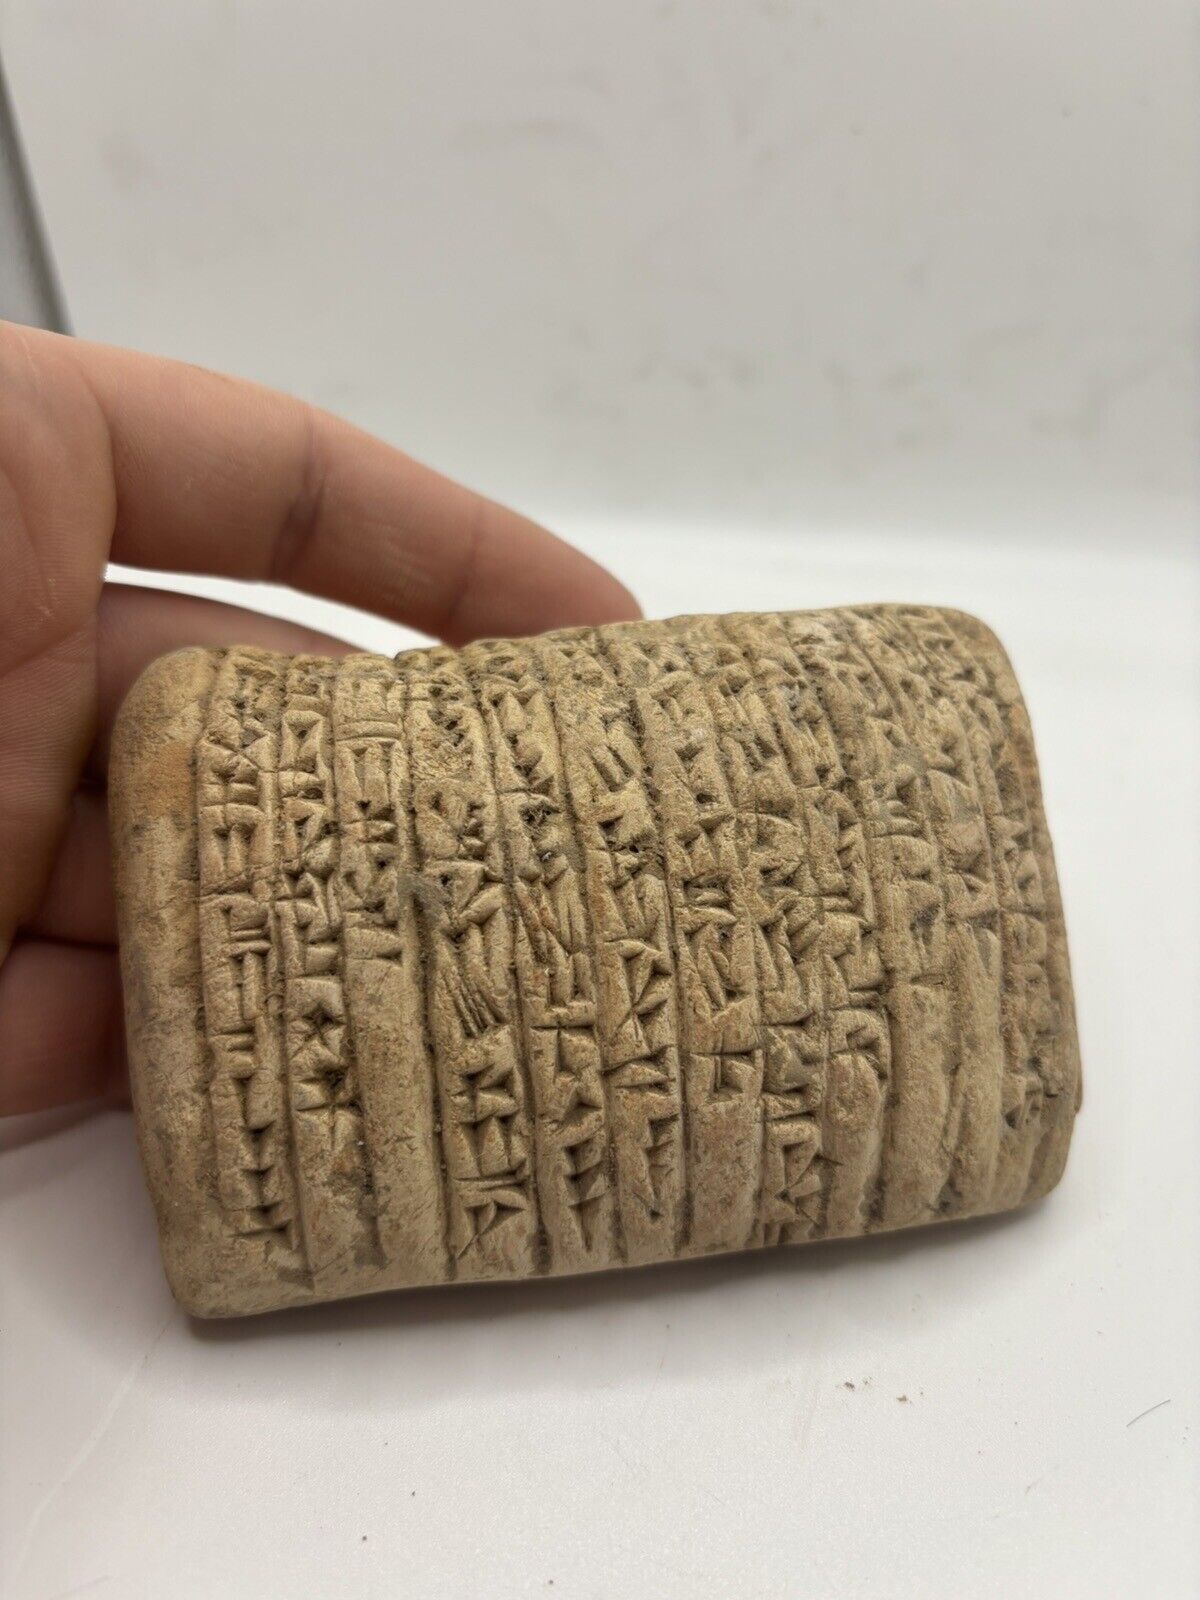 AMAZING NEAR EASTERN STONE TABLET WITH EARLY FORM OF WRITING CIRCA 3000 BCE